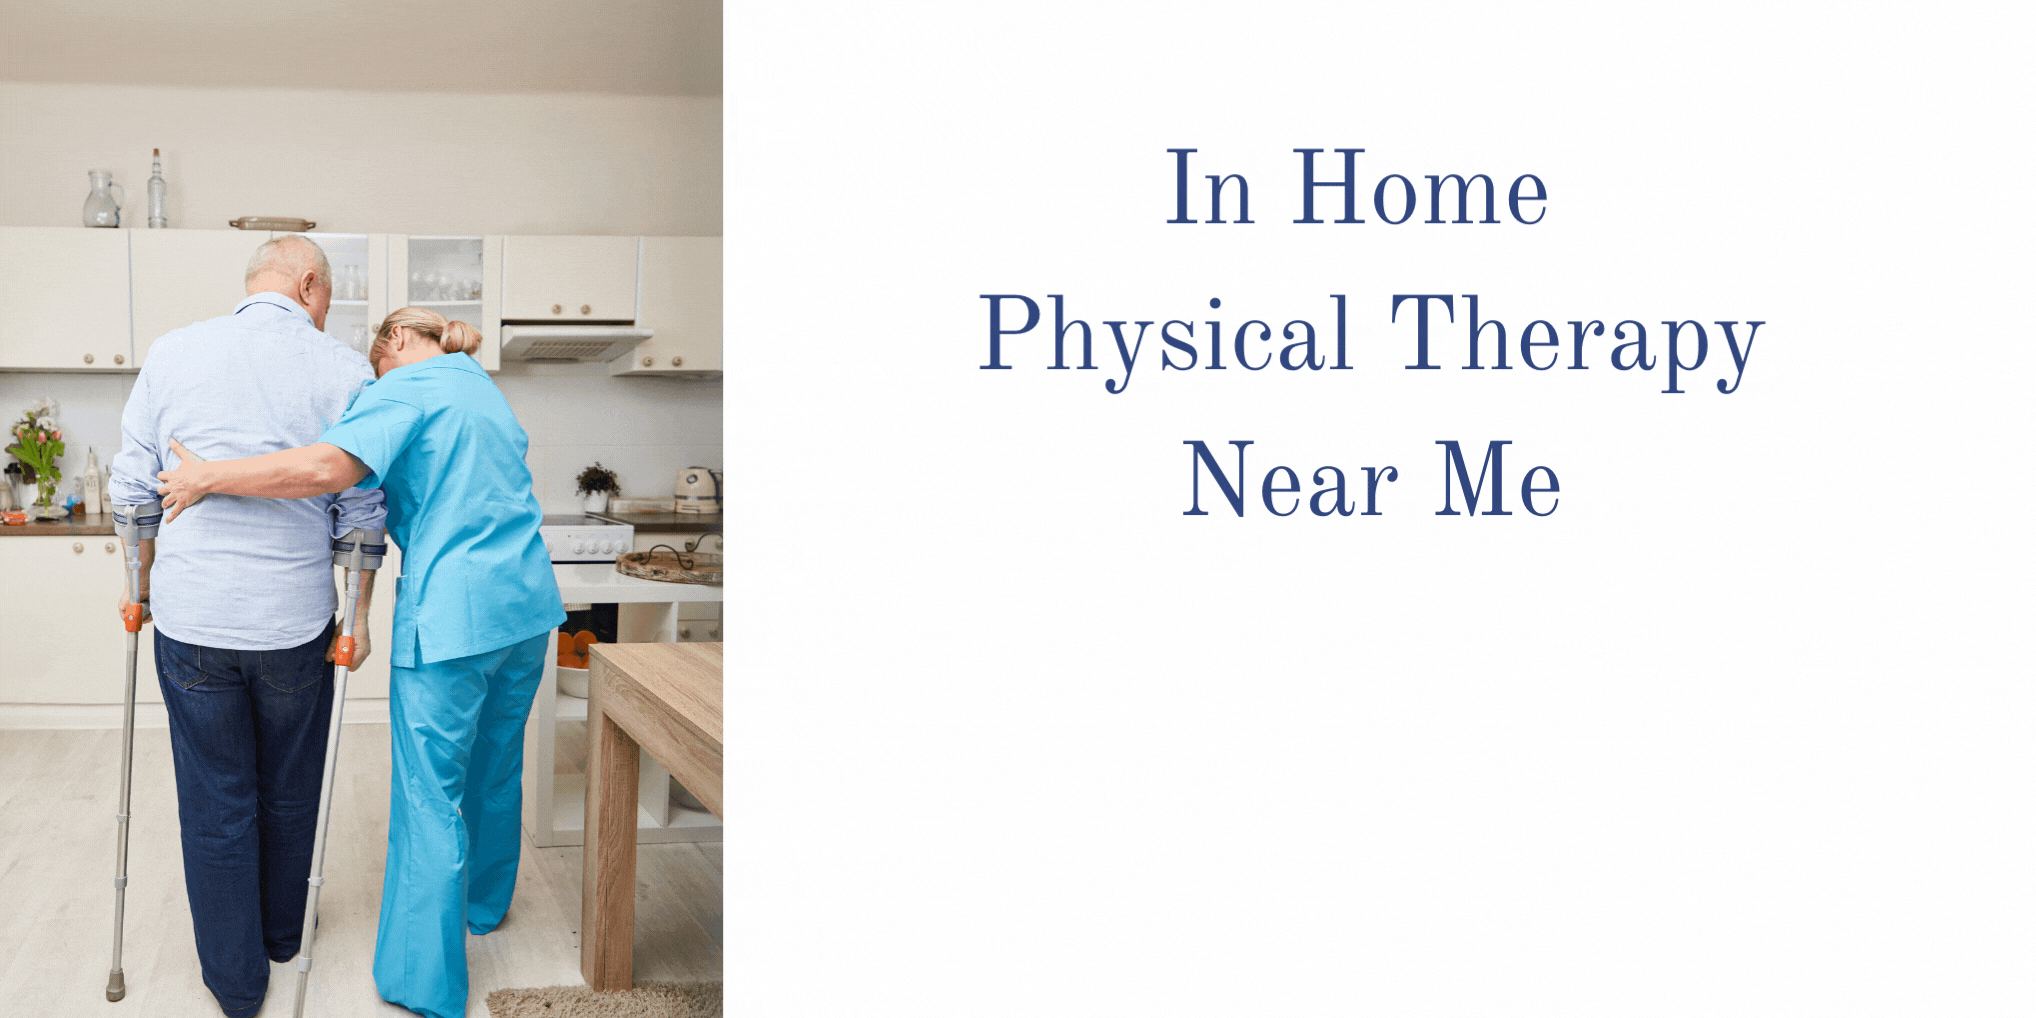 in-home-physical-therapy-near-me-hars